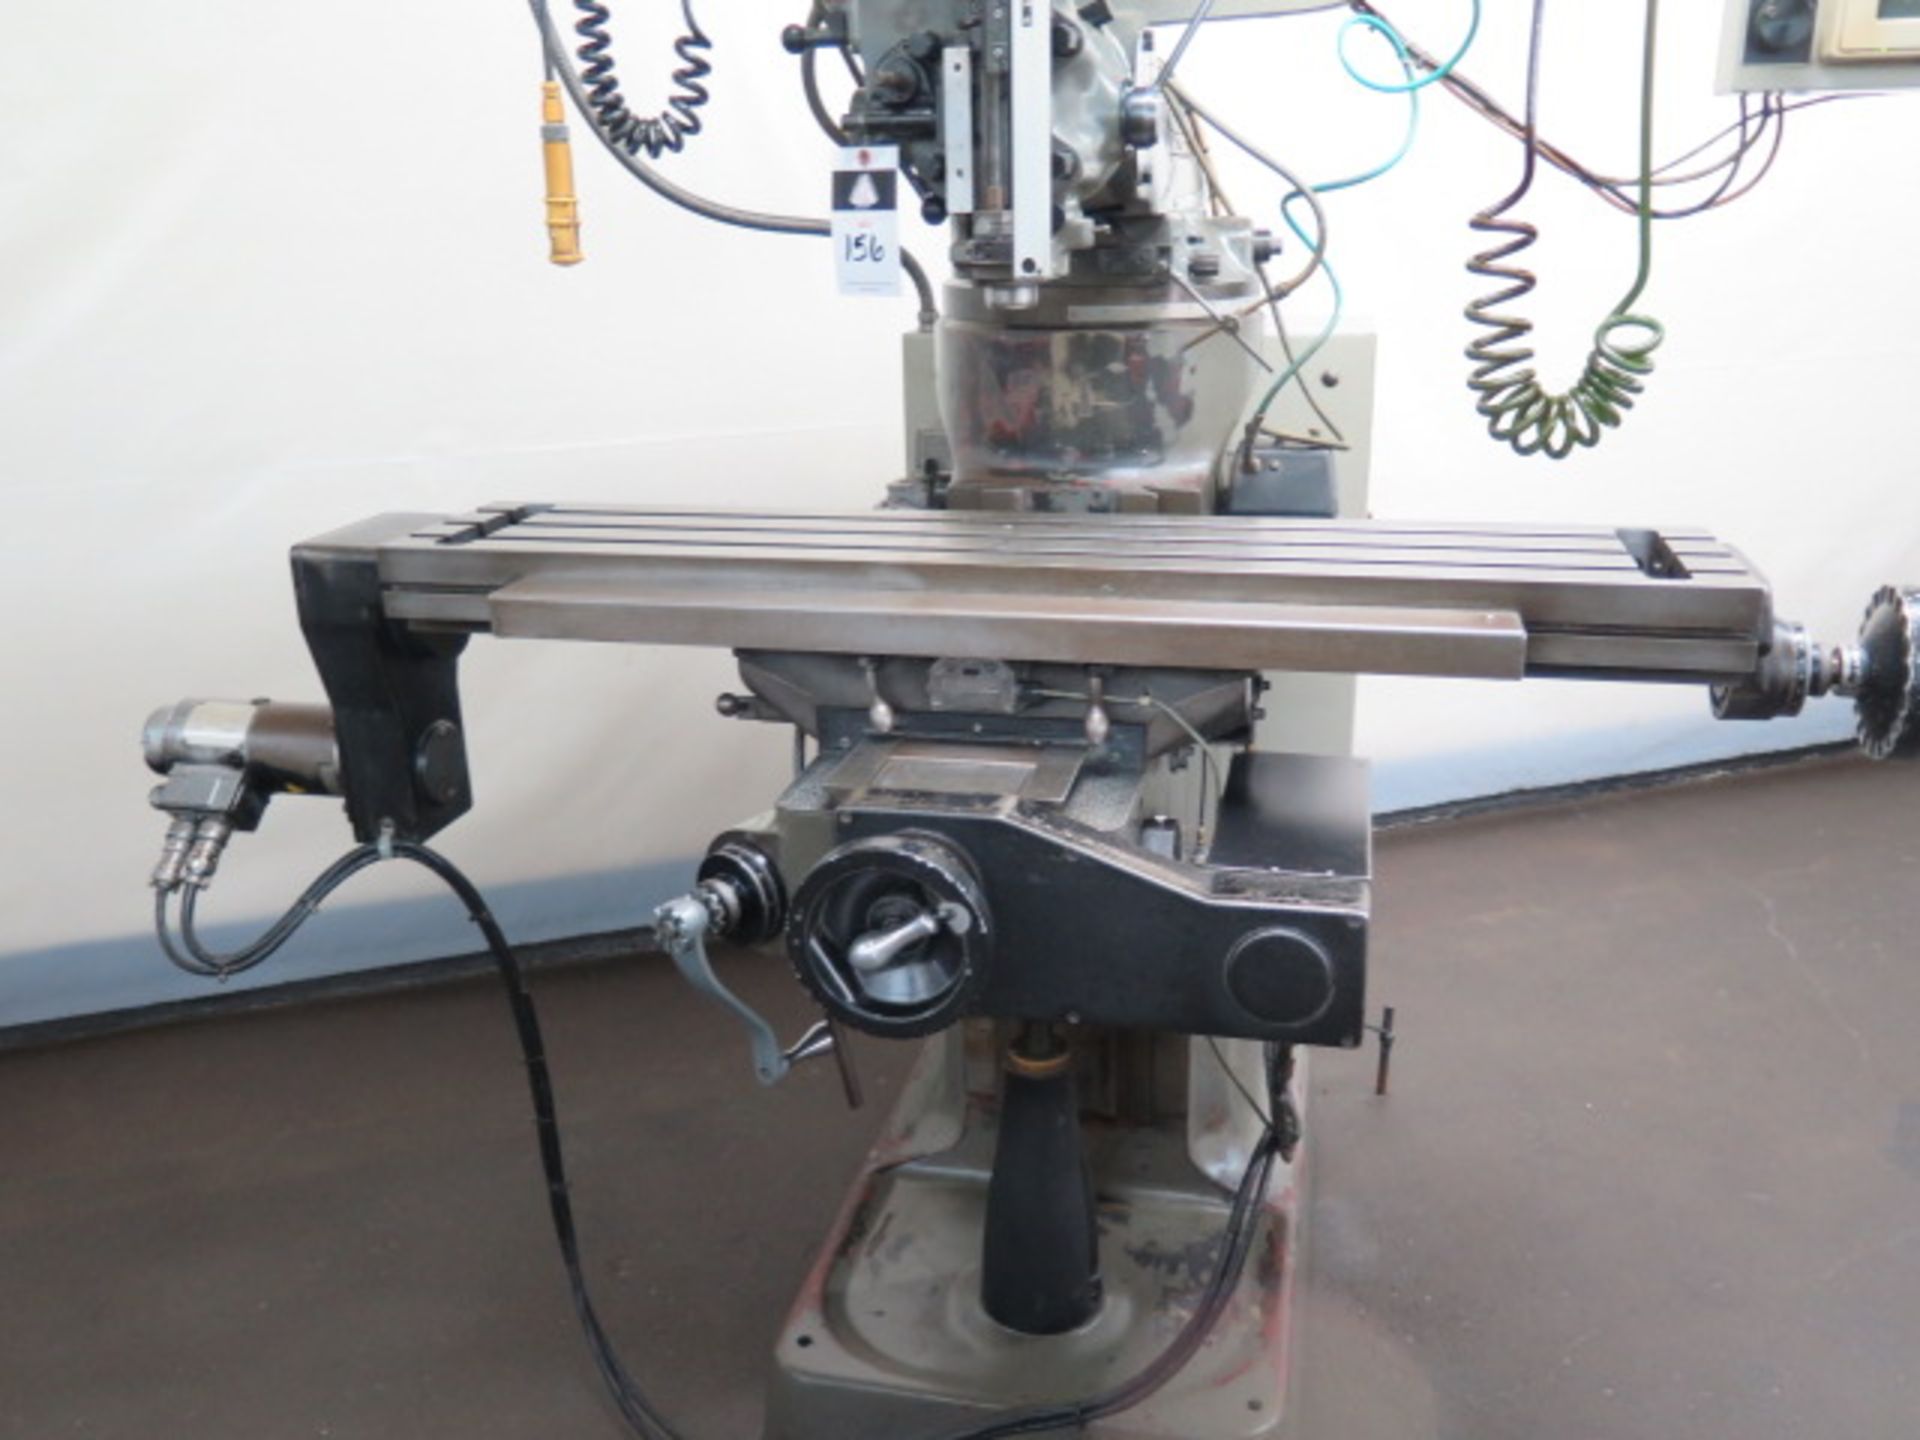 Bridgeport 2-Axis CNC Mill s/n 277669 w/ Bridgeport BPC2M Controls, 2Hp, 60-4200 Dial, SOLD AS IS - Image 3 of 11